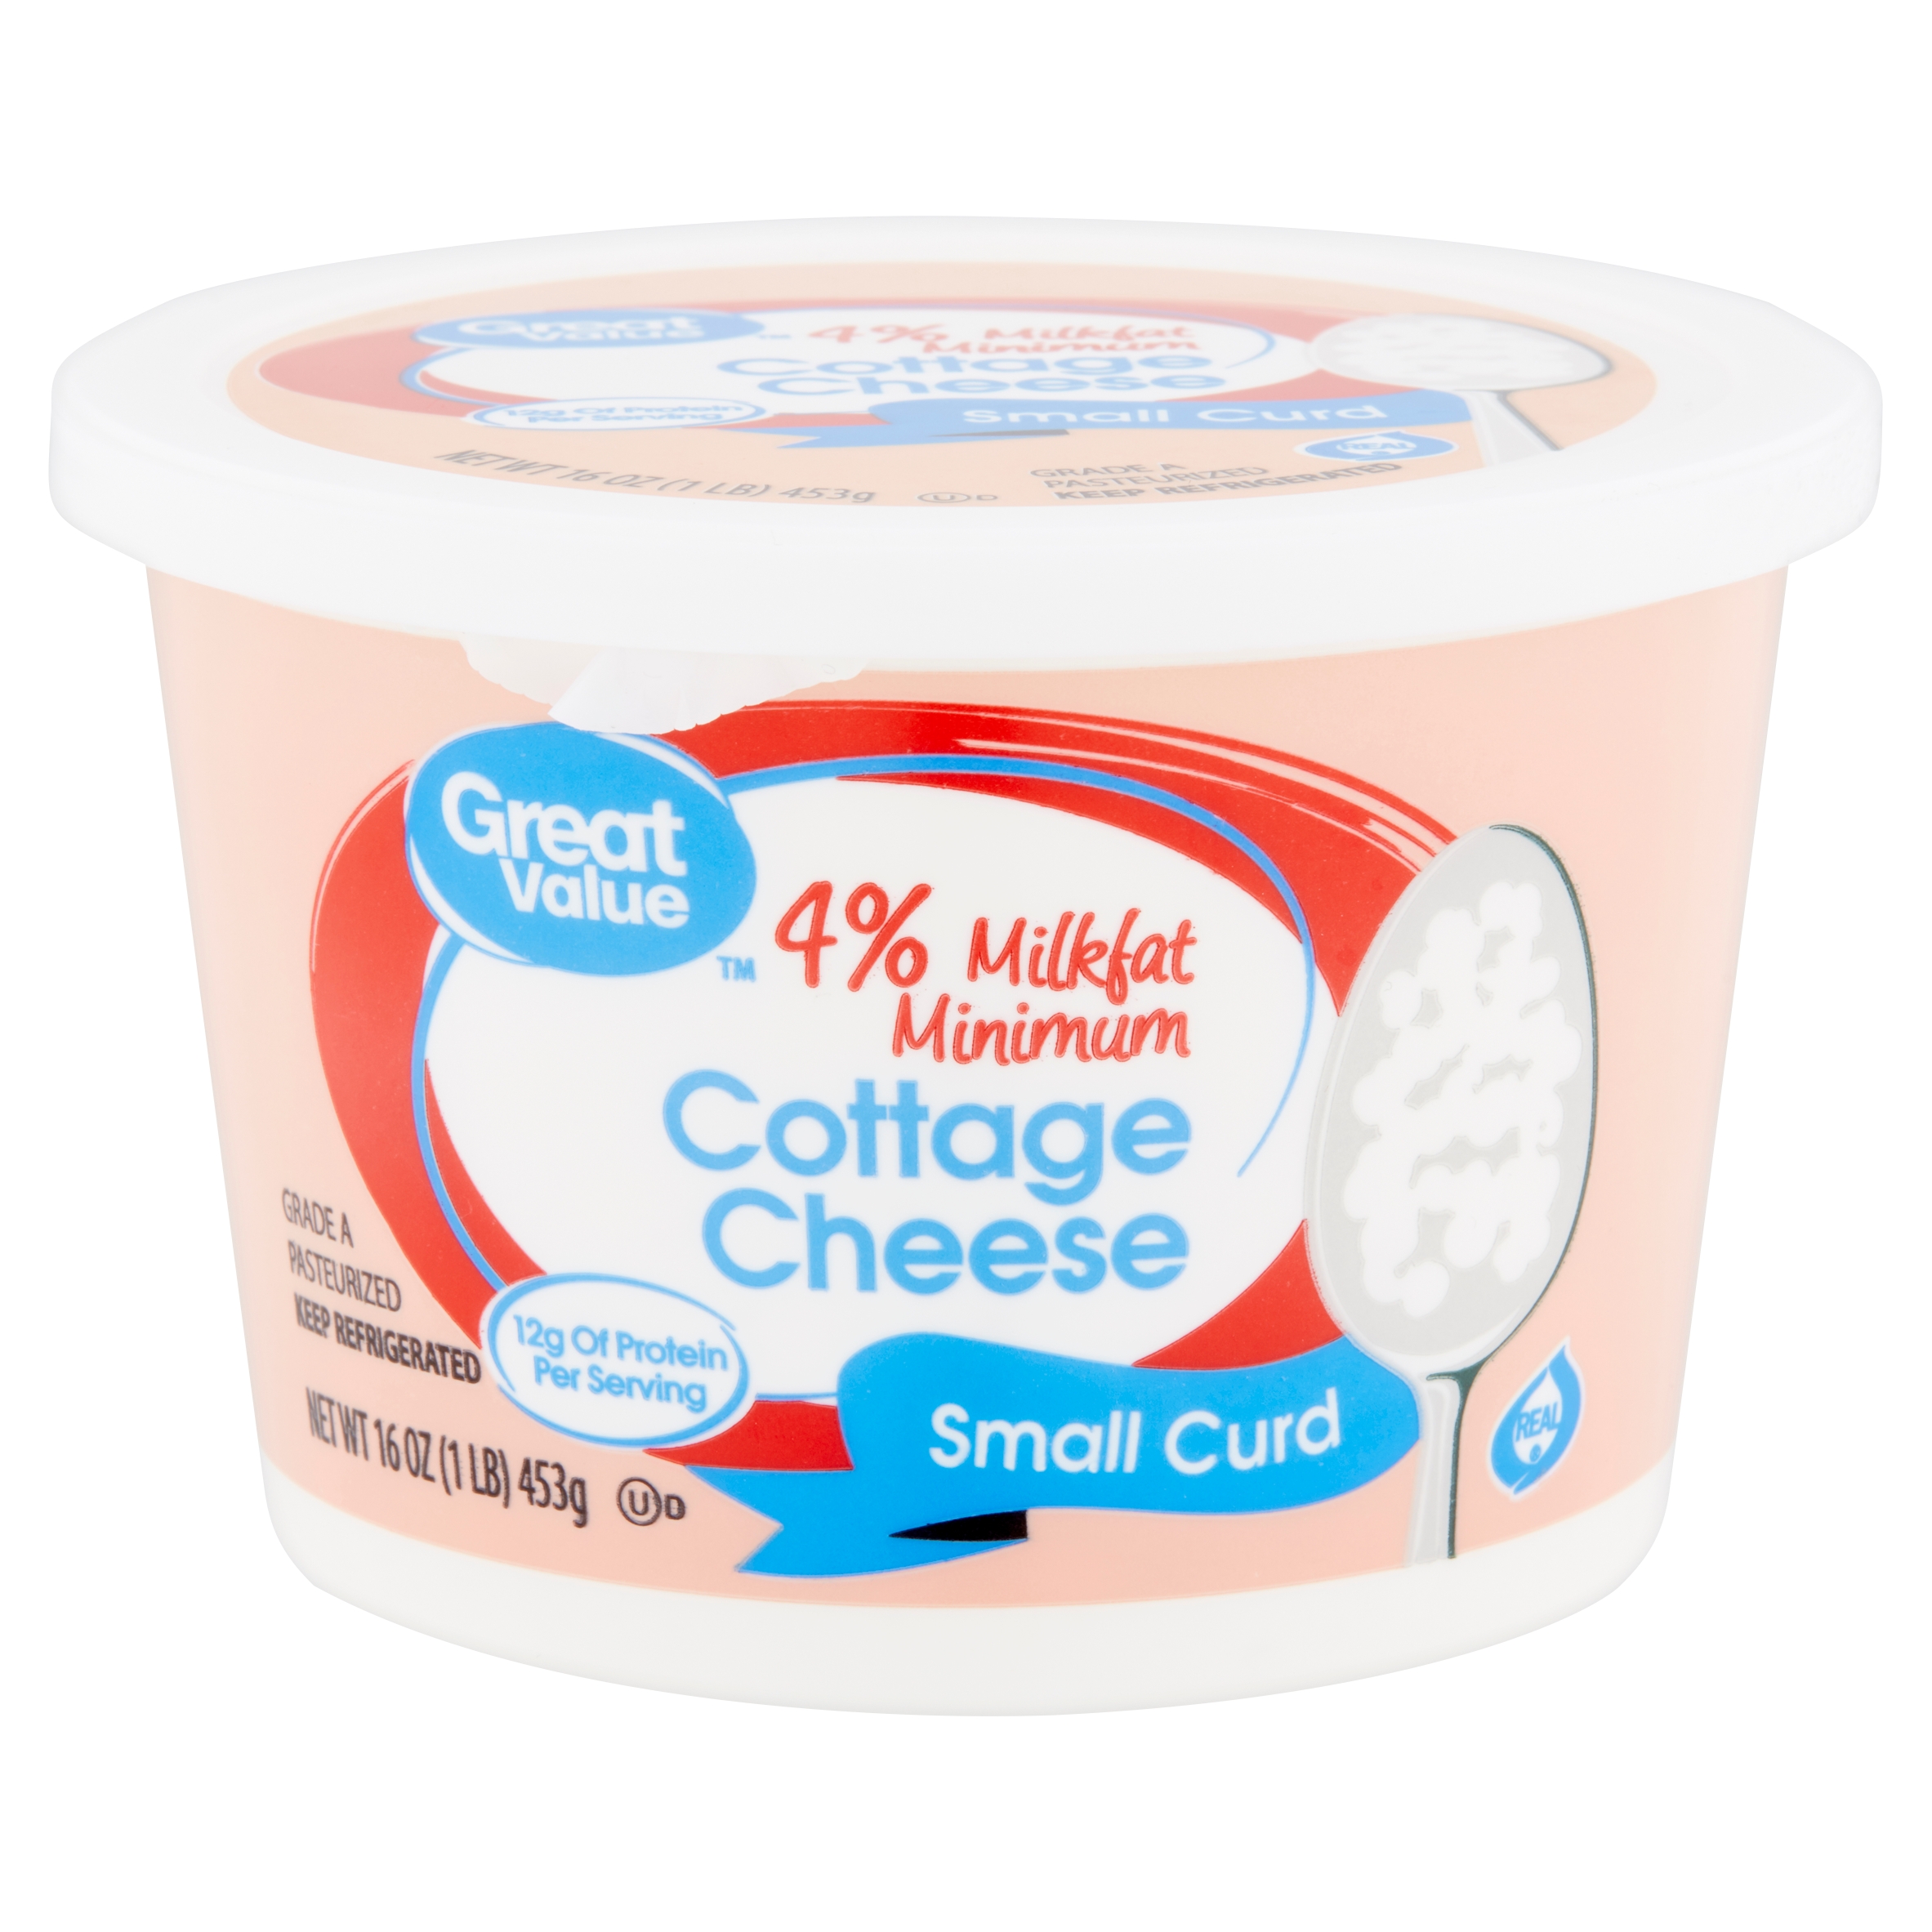 Great Value 4% Milkfat Minimum Small Curd Cottage Cheese, 16 Oz Image